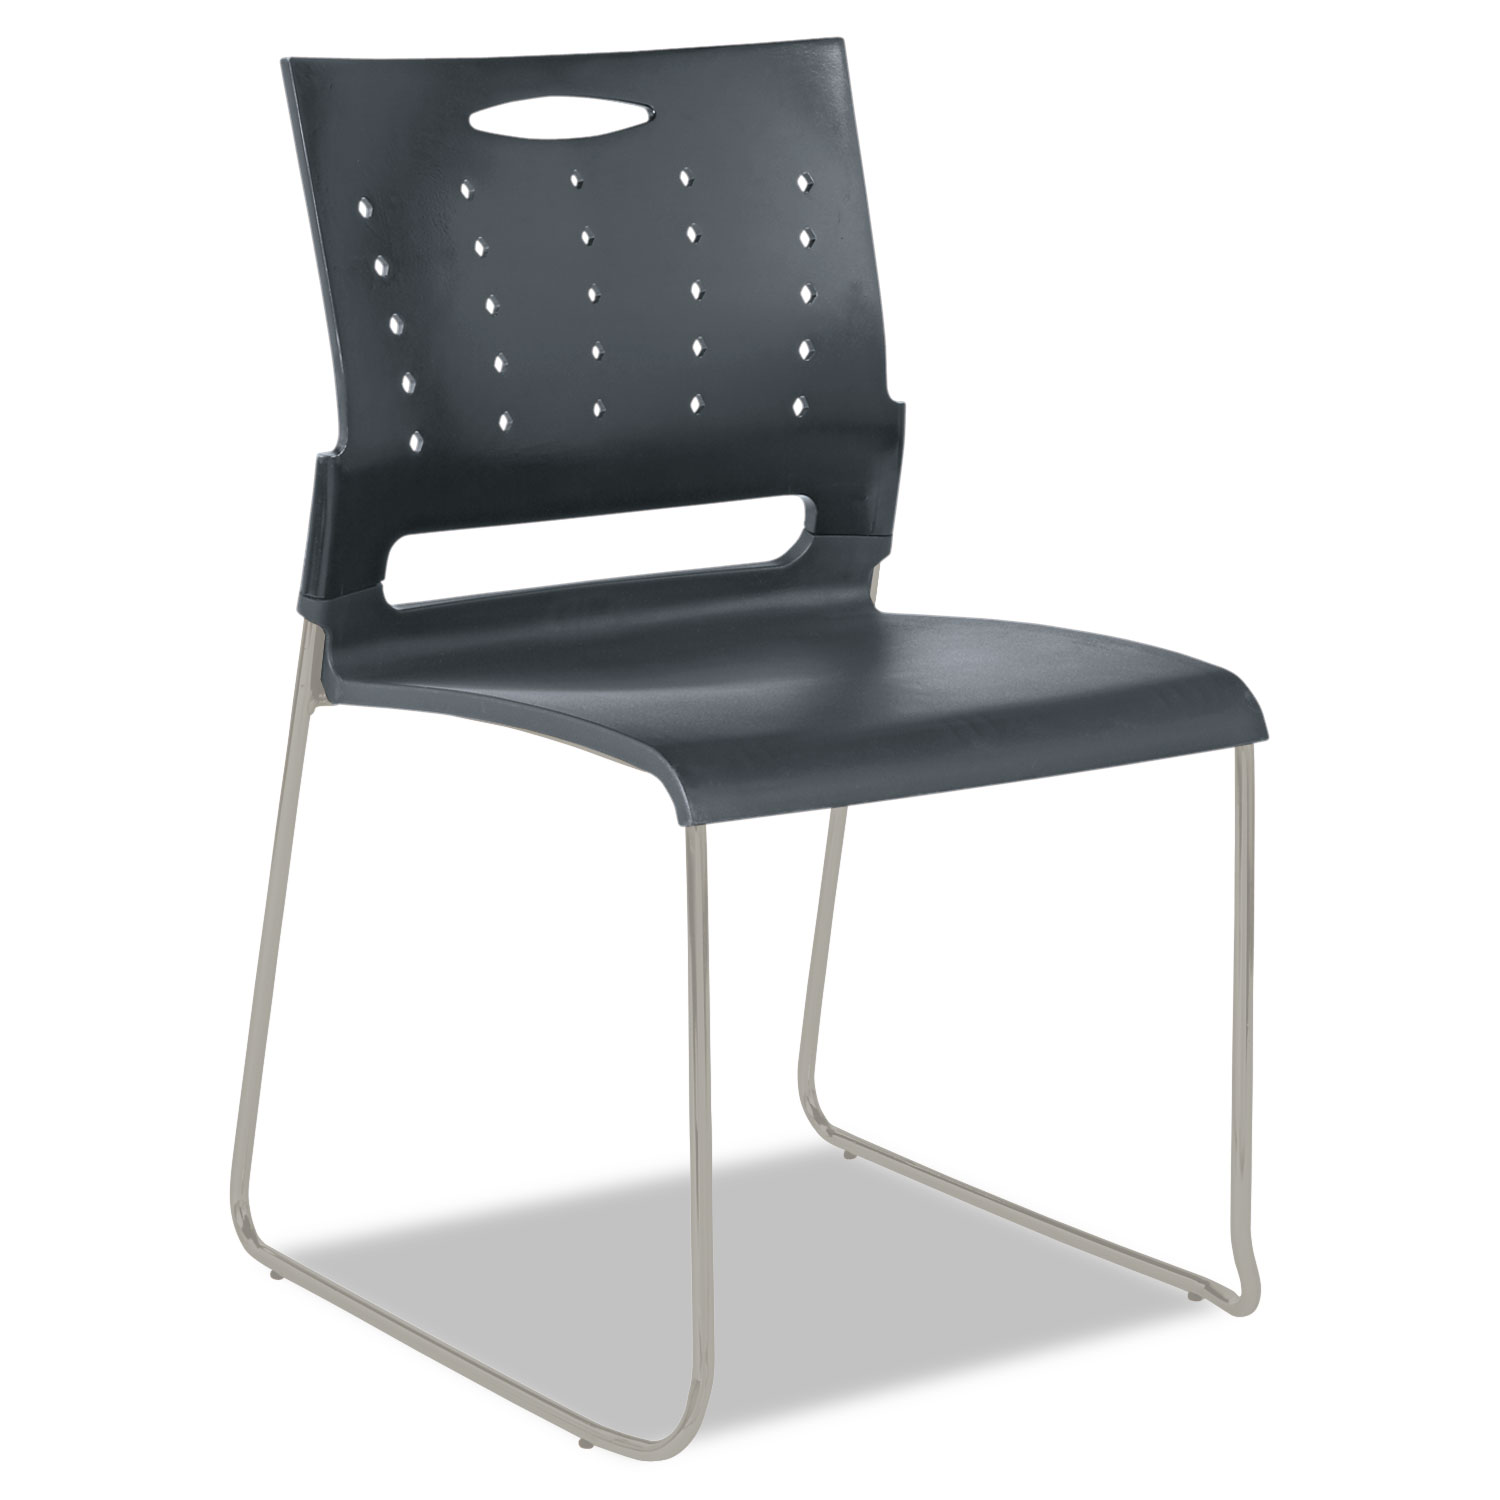 Alera Continental Series Perforated Back Stacking Chairs, Charcoal Gray, 4/CT